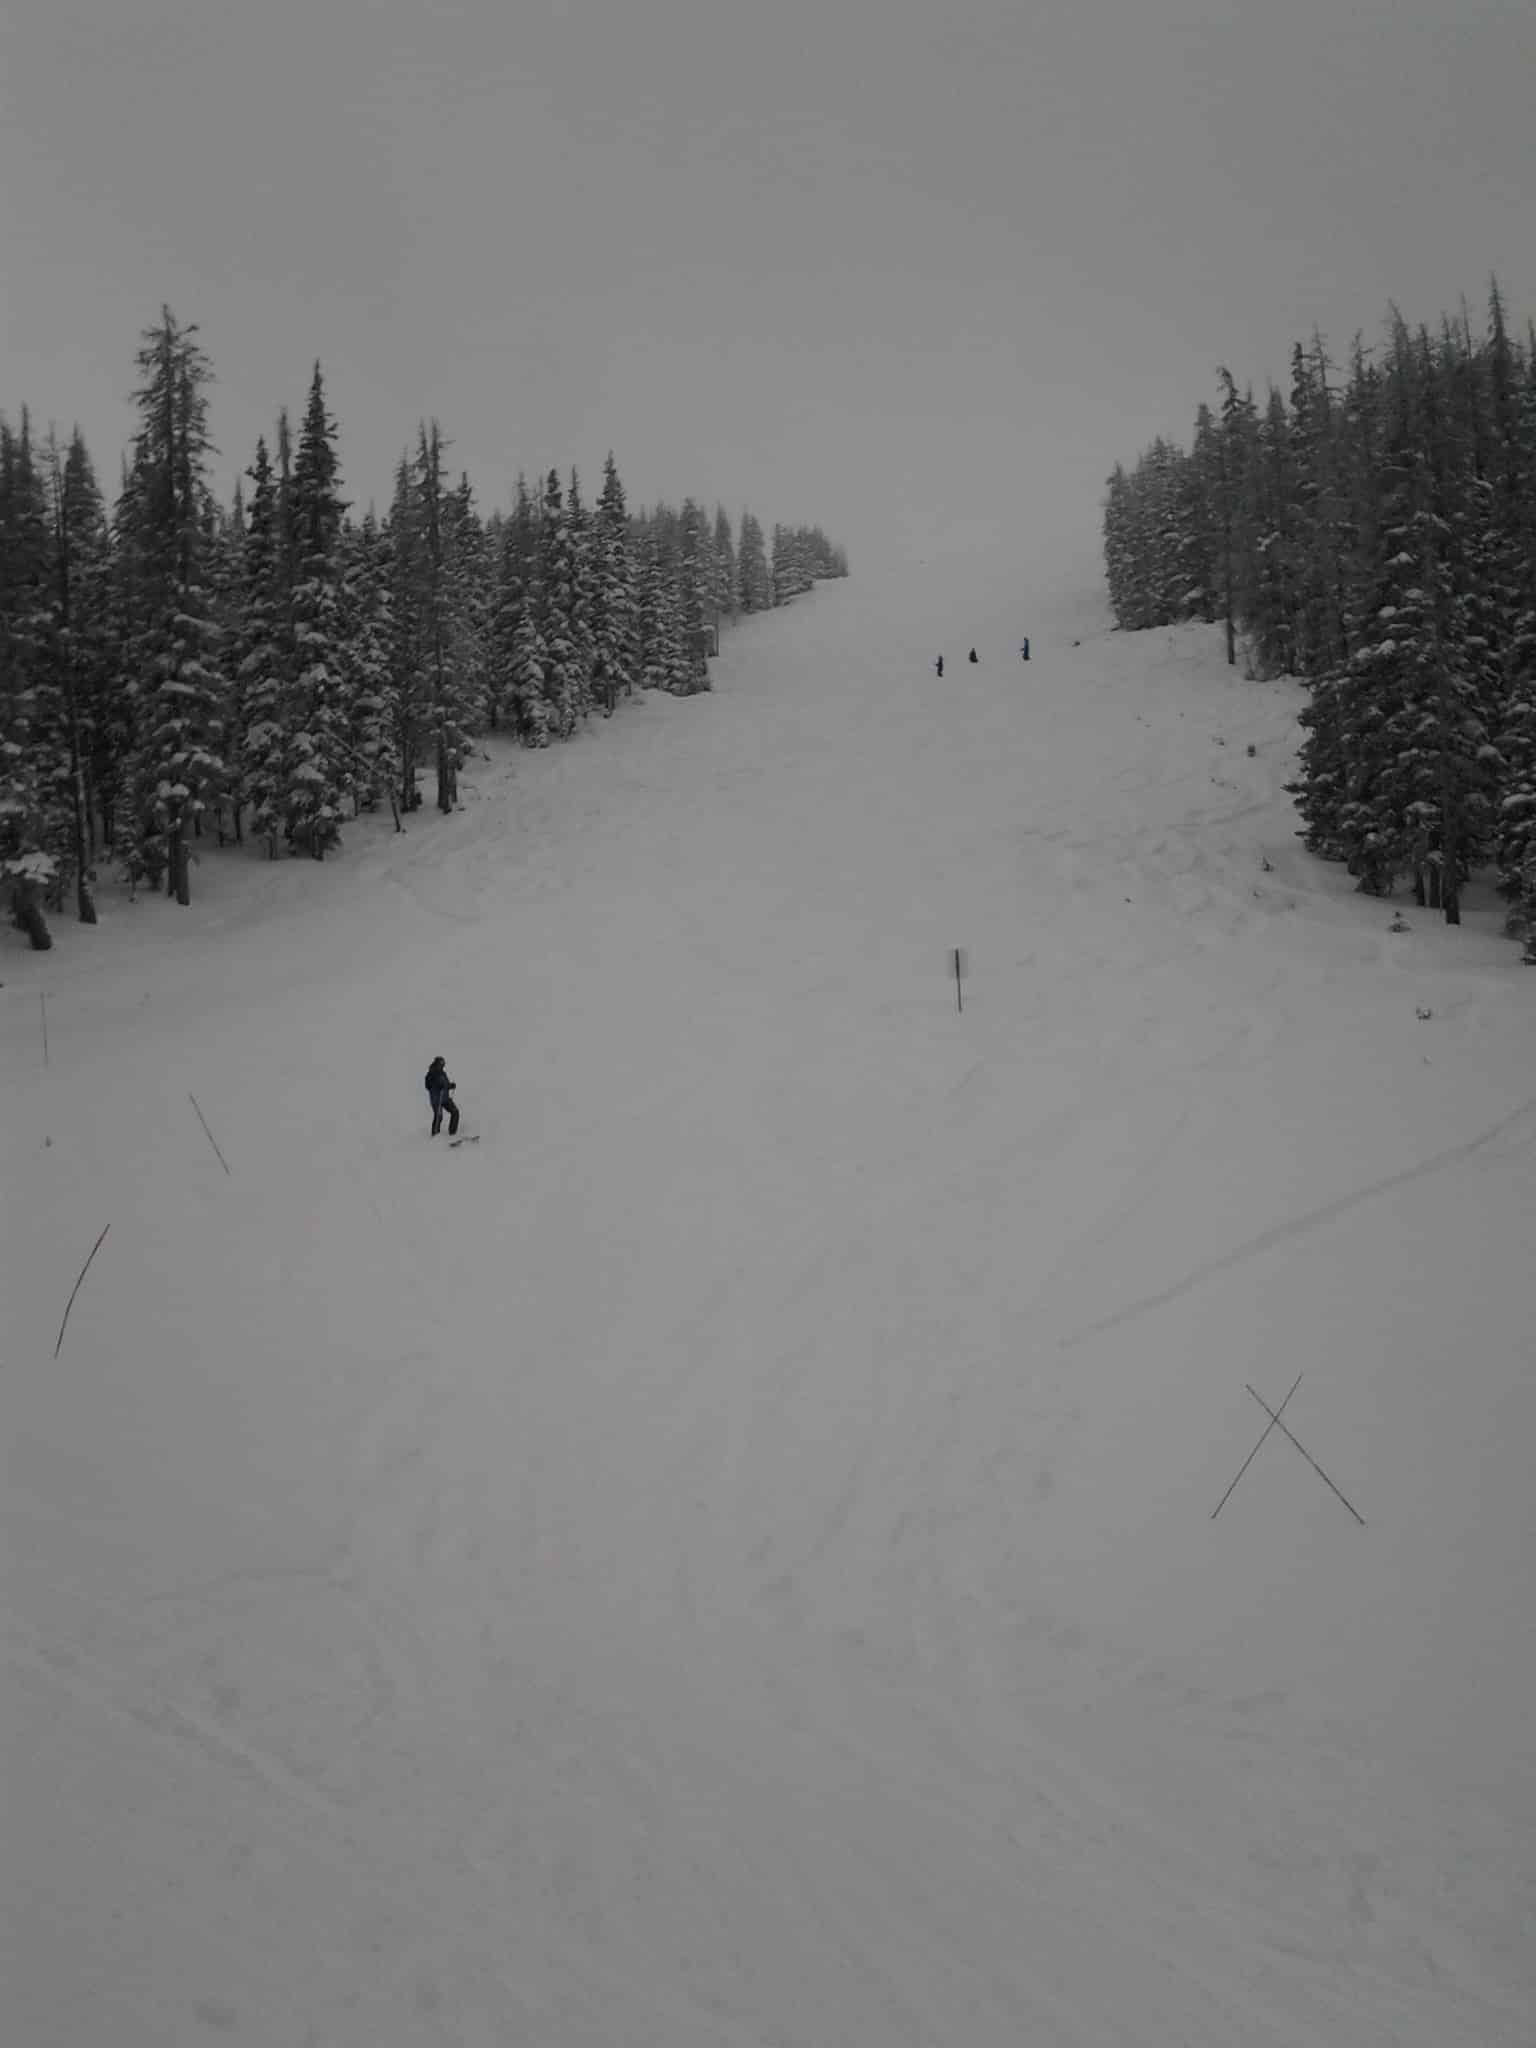 Ski slope with four skiing down a steep run on a snowy and cloudy day.